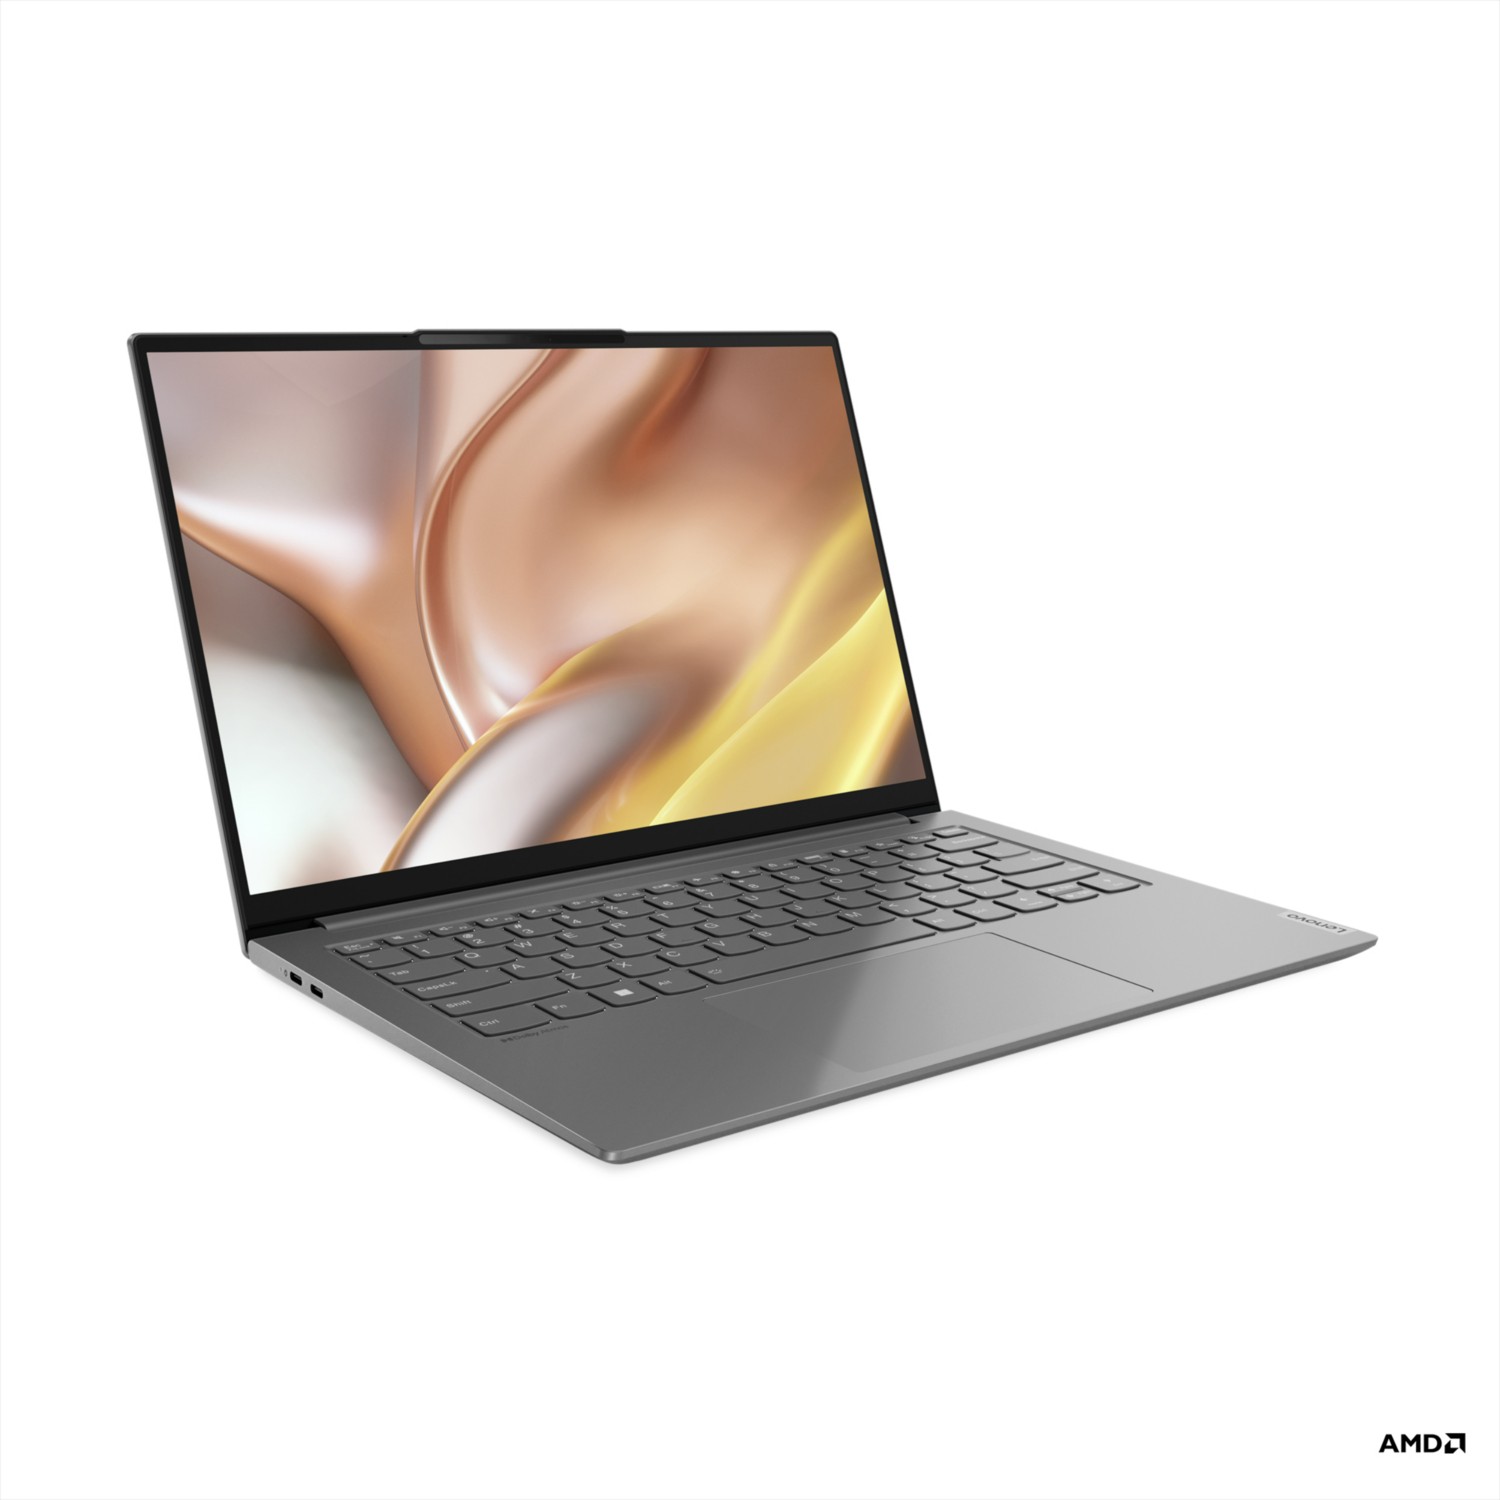 Lenovo Yoga Slim 7 Pro refreshed with up to an AMD Ryzen 9 6900HS